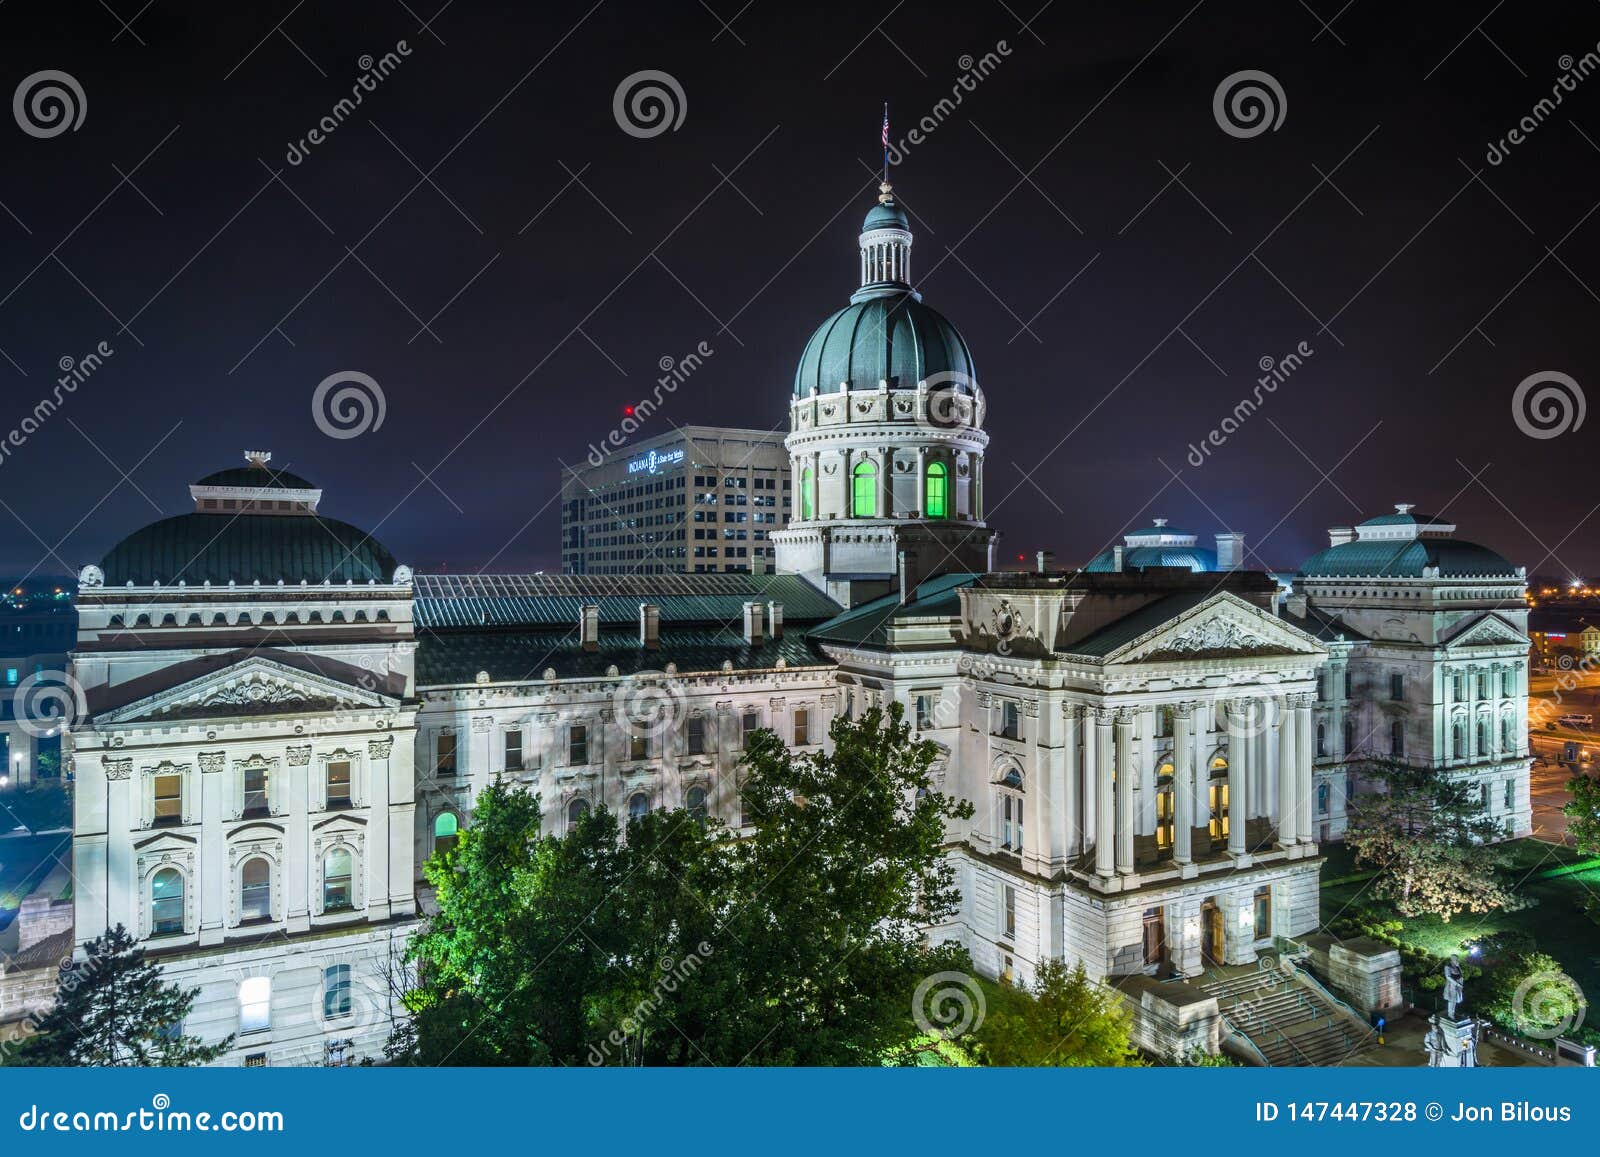 the indiana statehouse at night in indianapolis, indiana